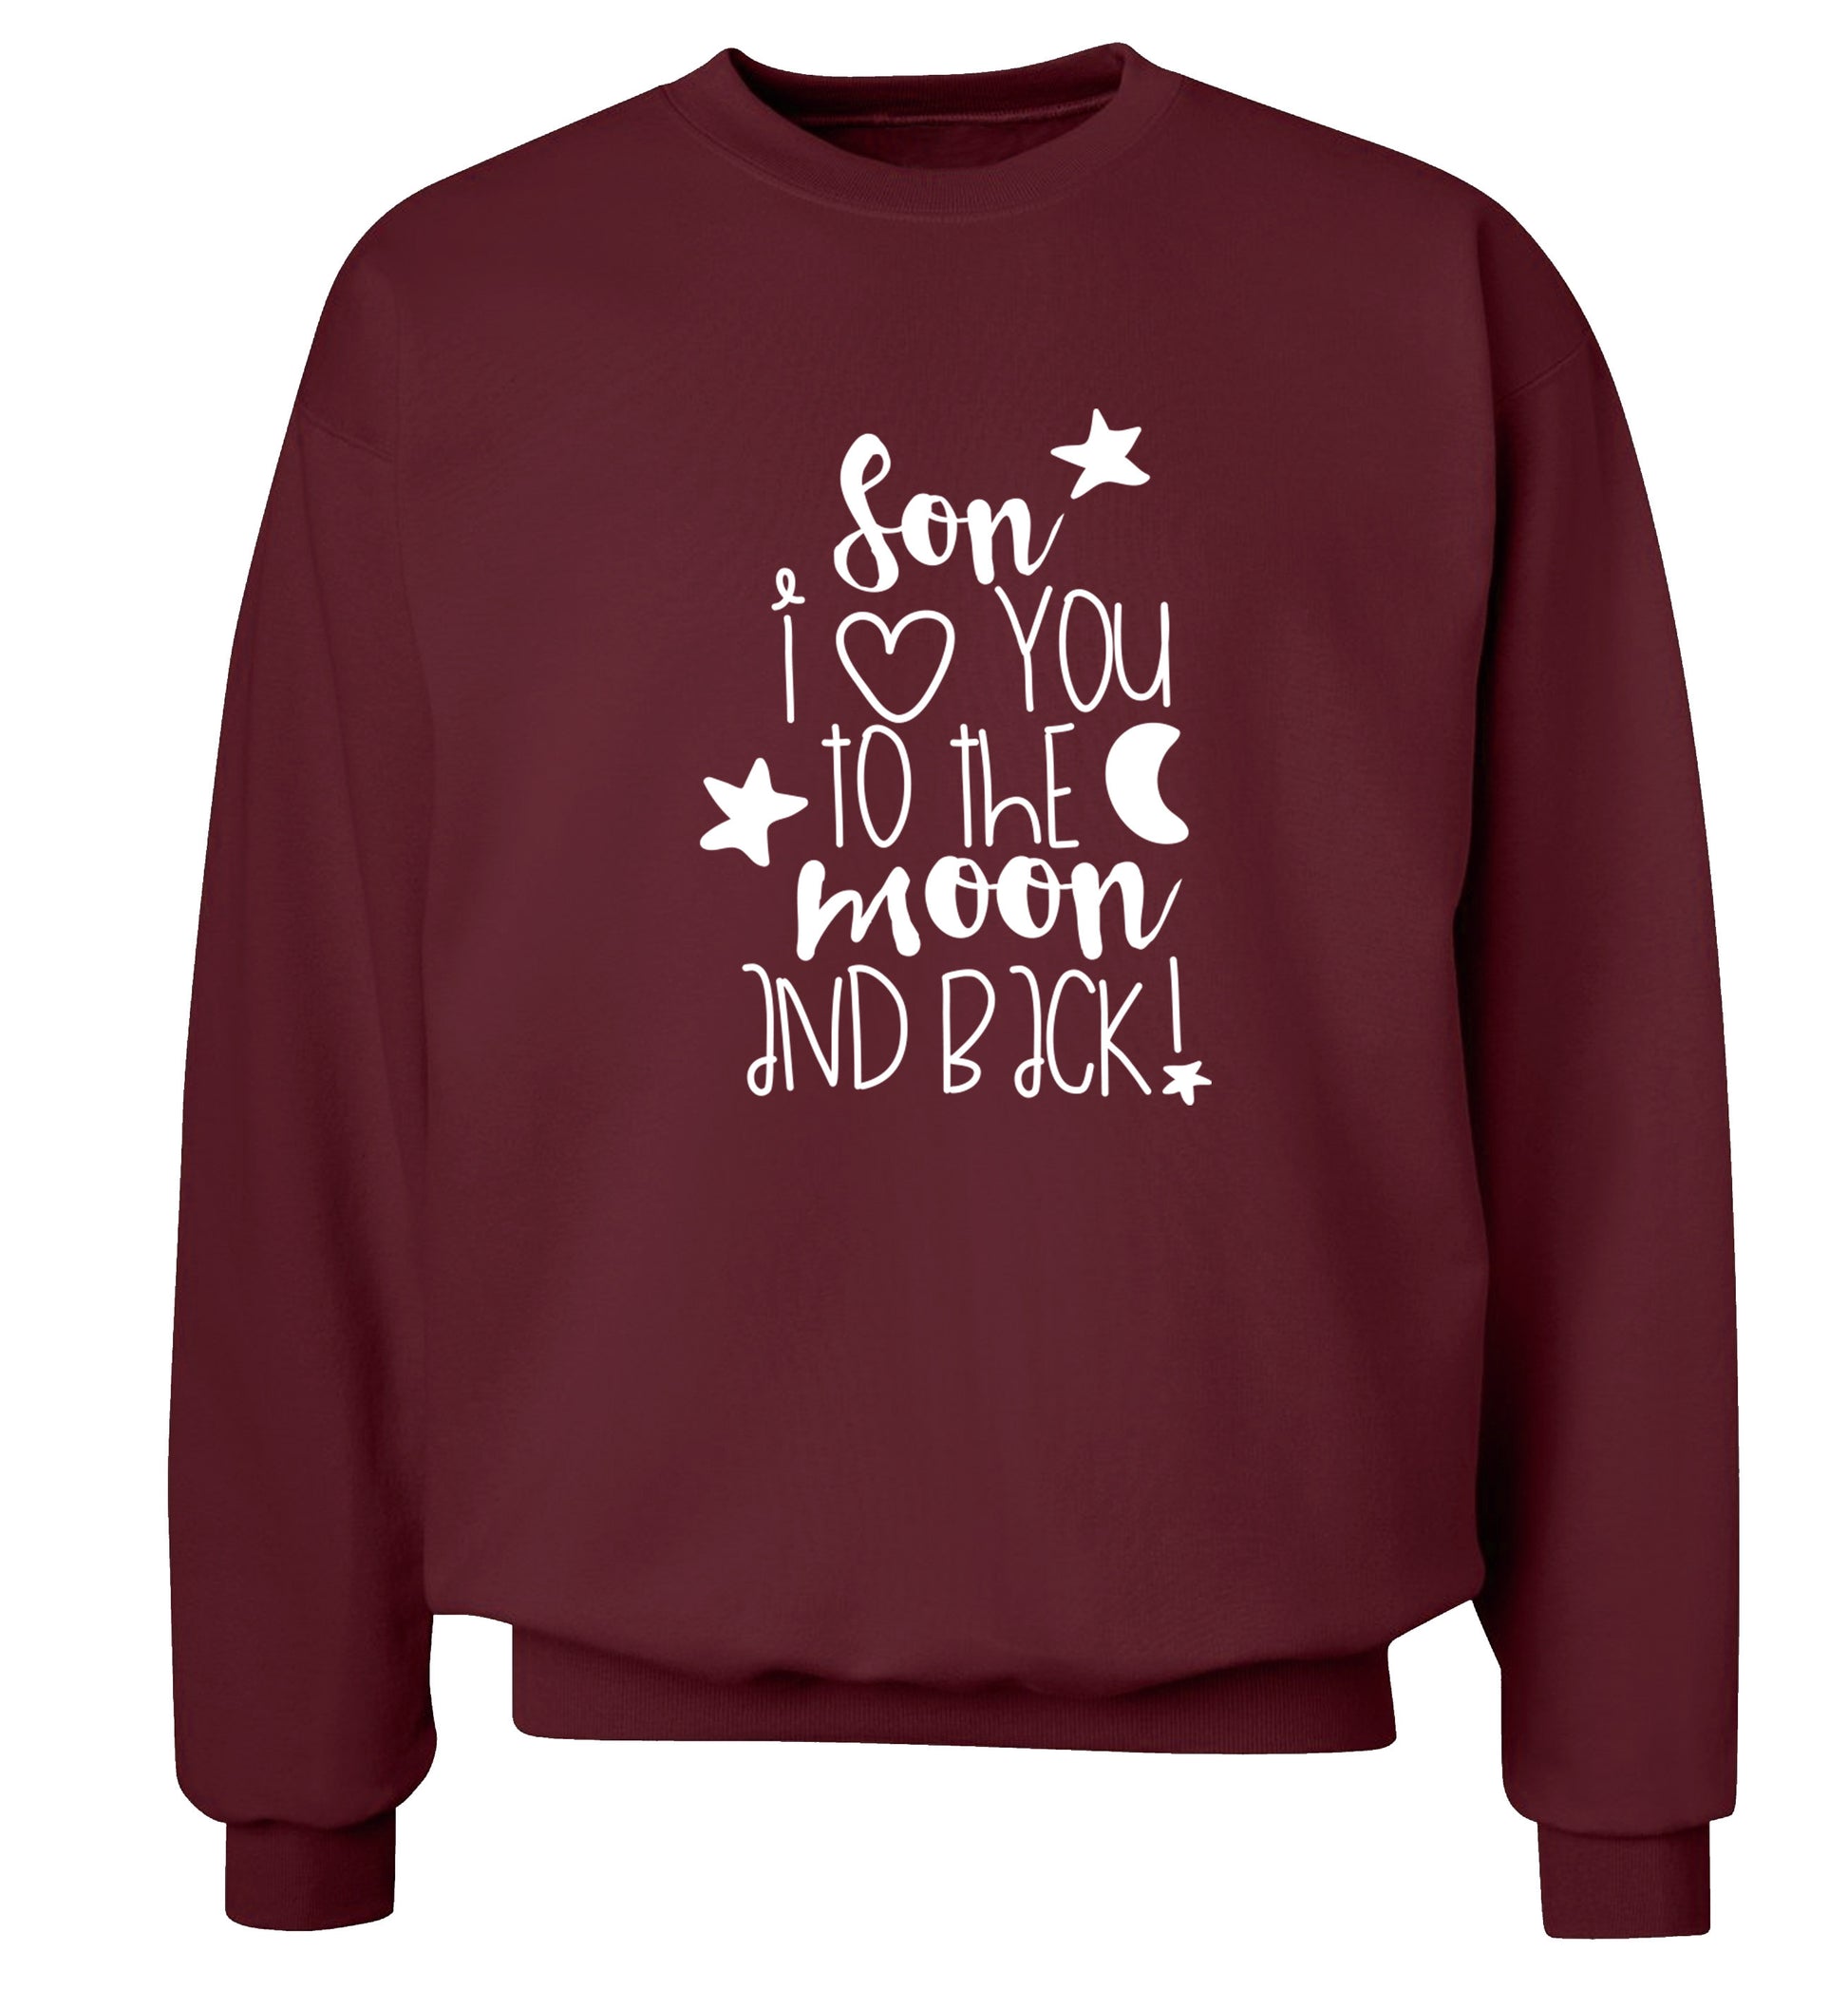 Son I love you to the moon and back Adult's unisex maroon  sweater 2XL